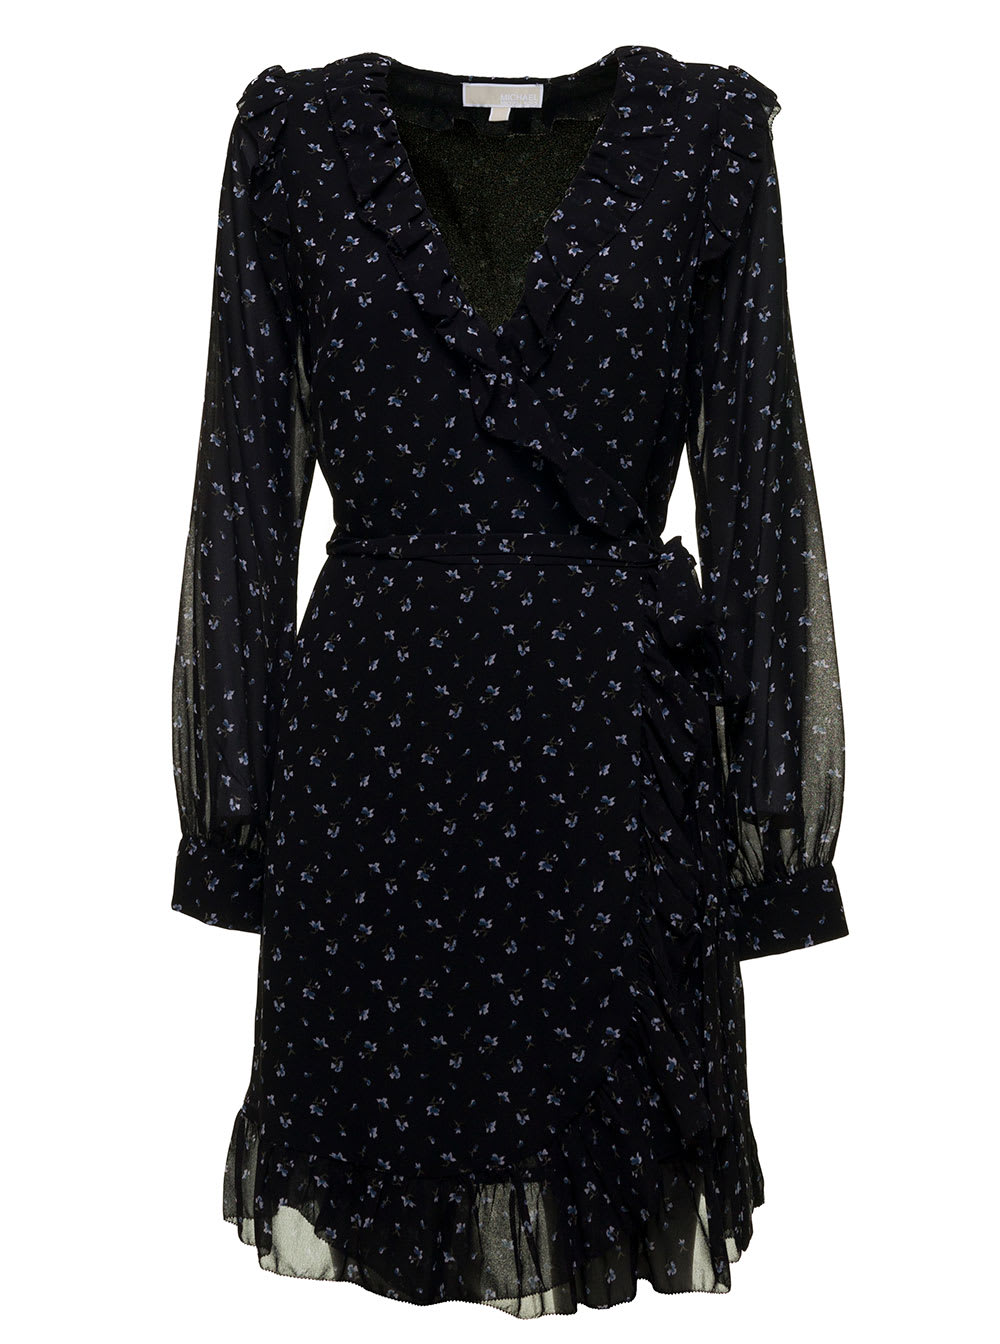 MICHAEL Michael Kors Black Floral Dress In Recycled Fabric